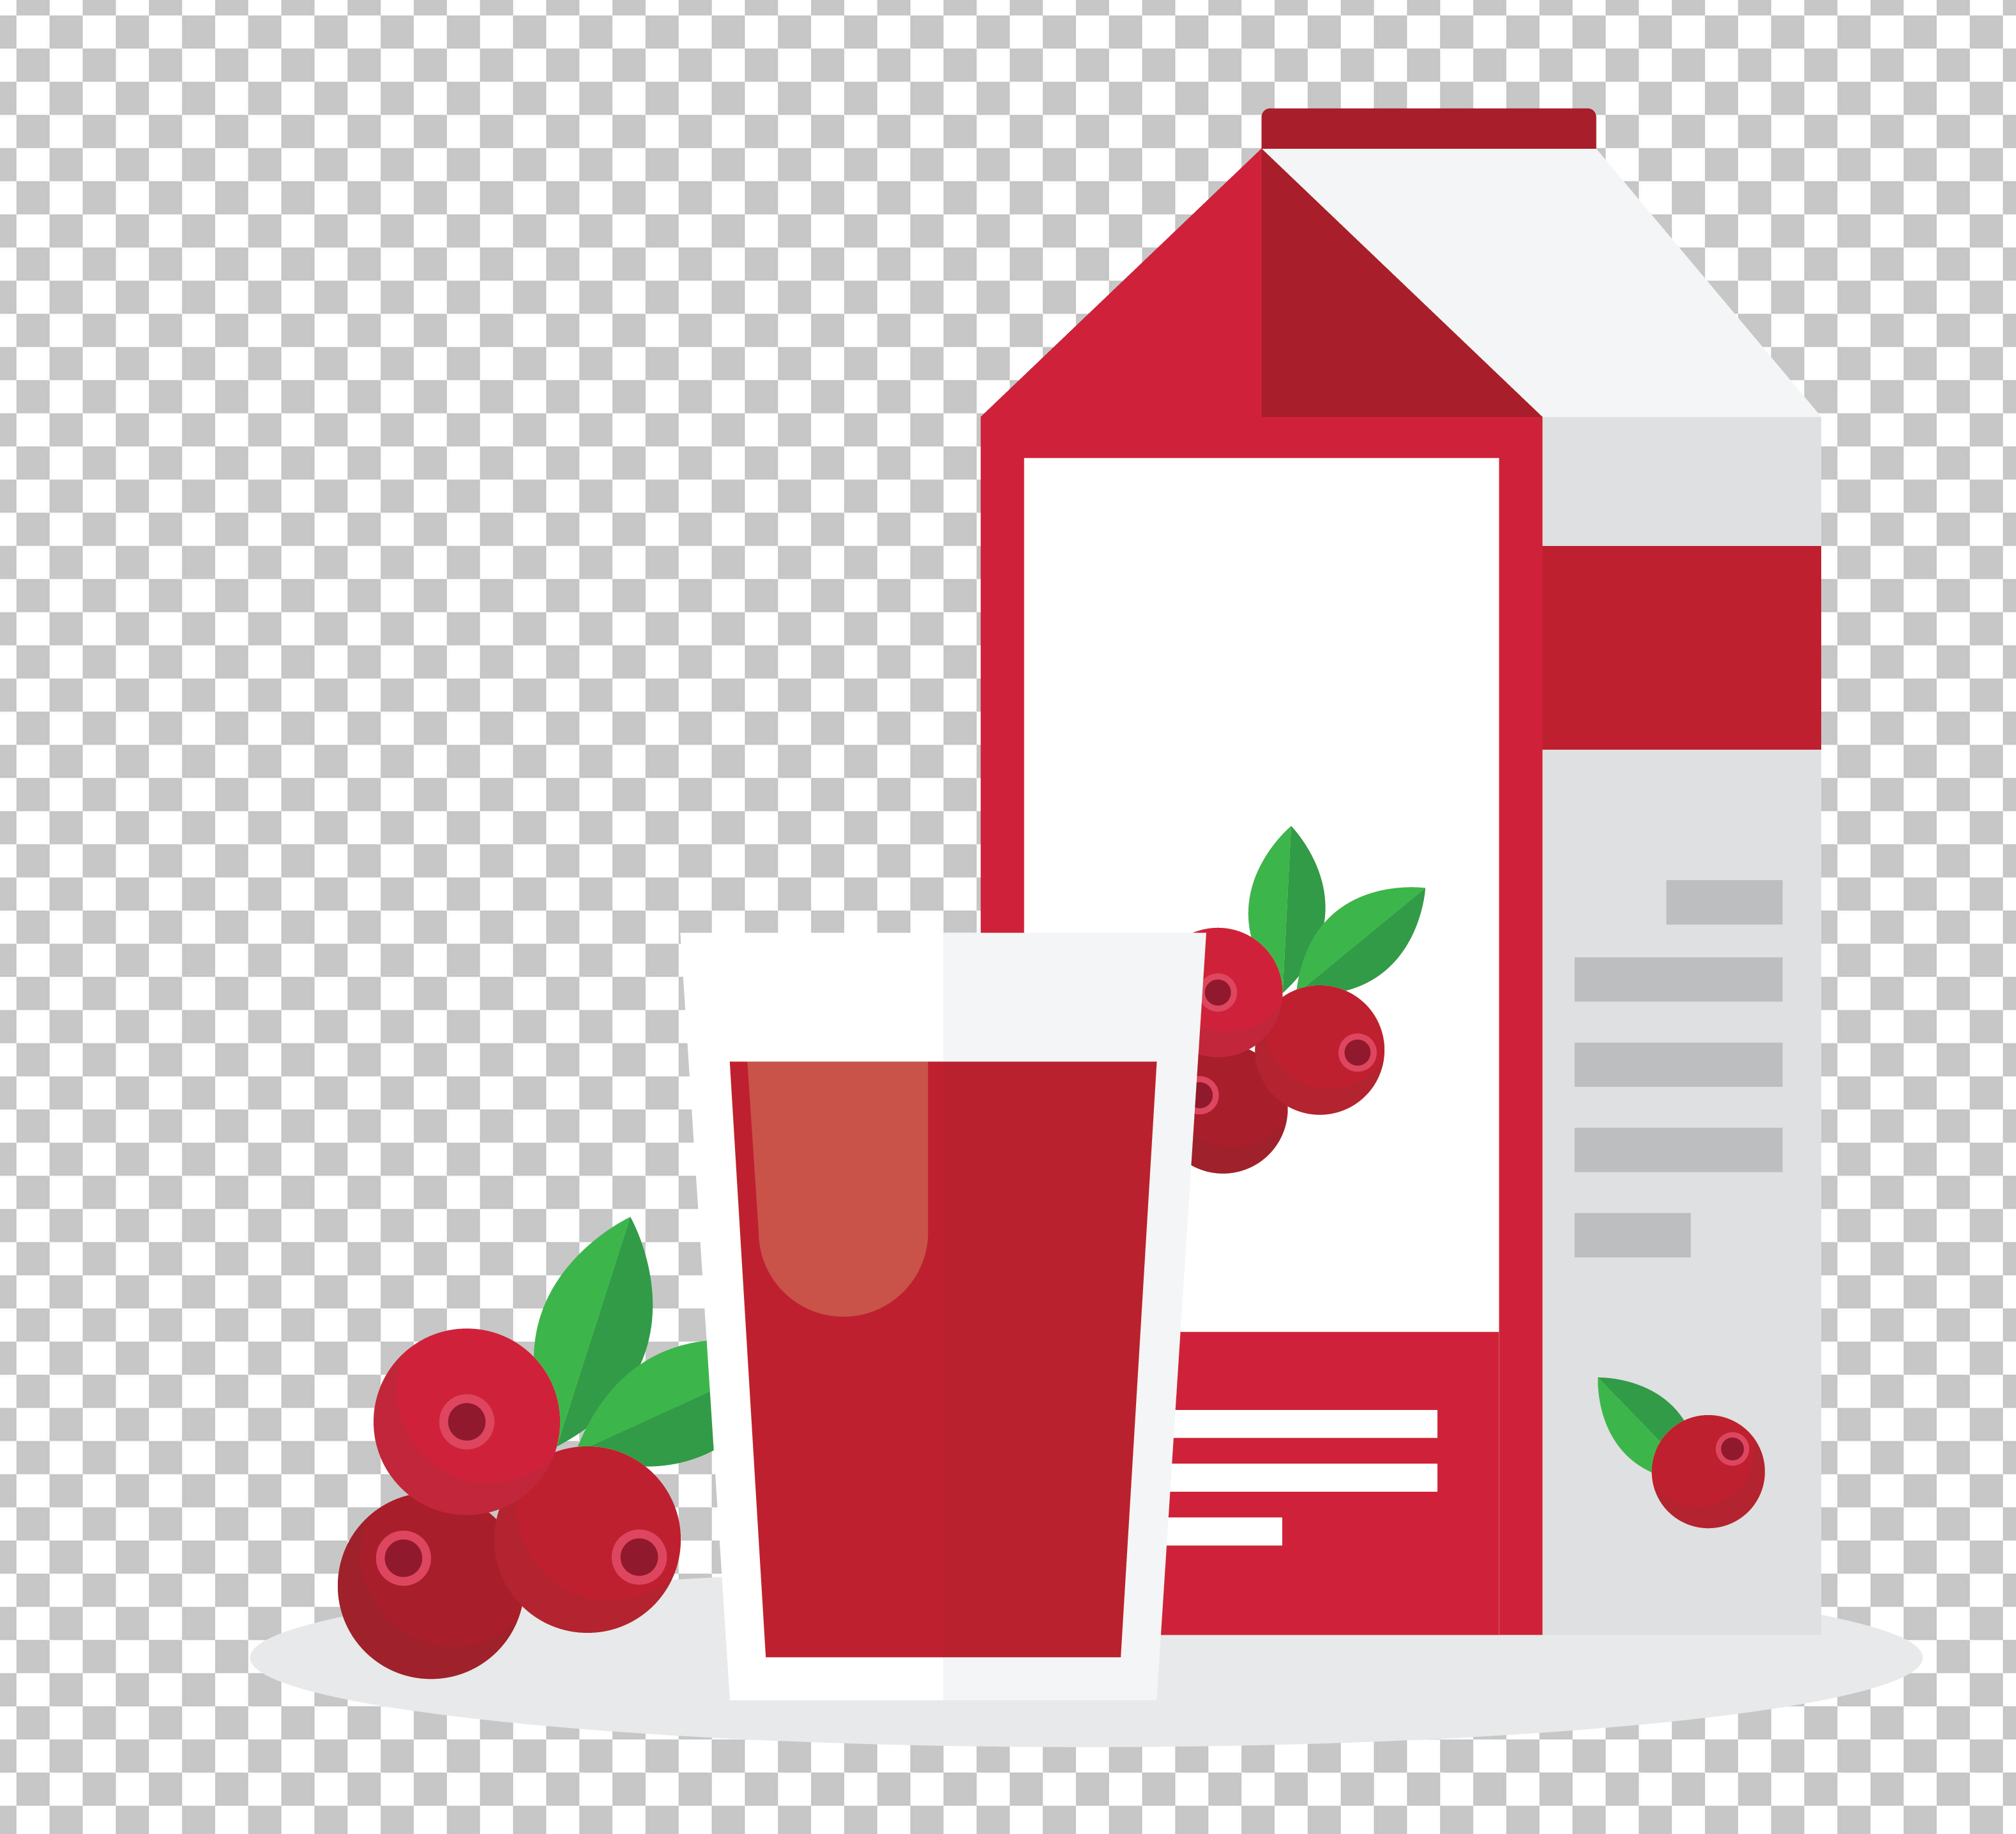 Cranberry Juice and a glass of cranberry juice PNG Image.